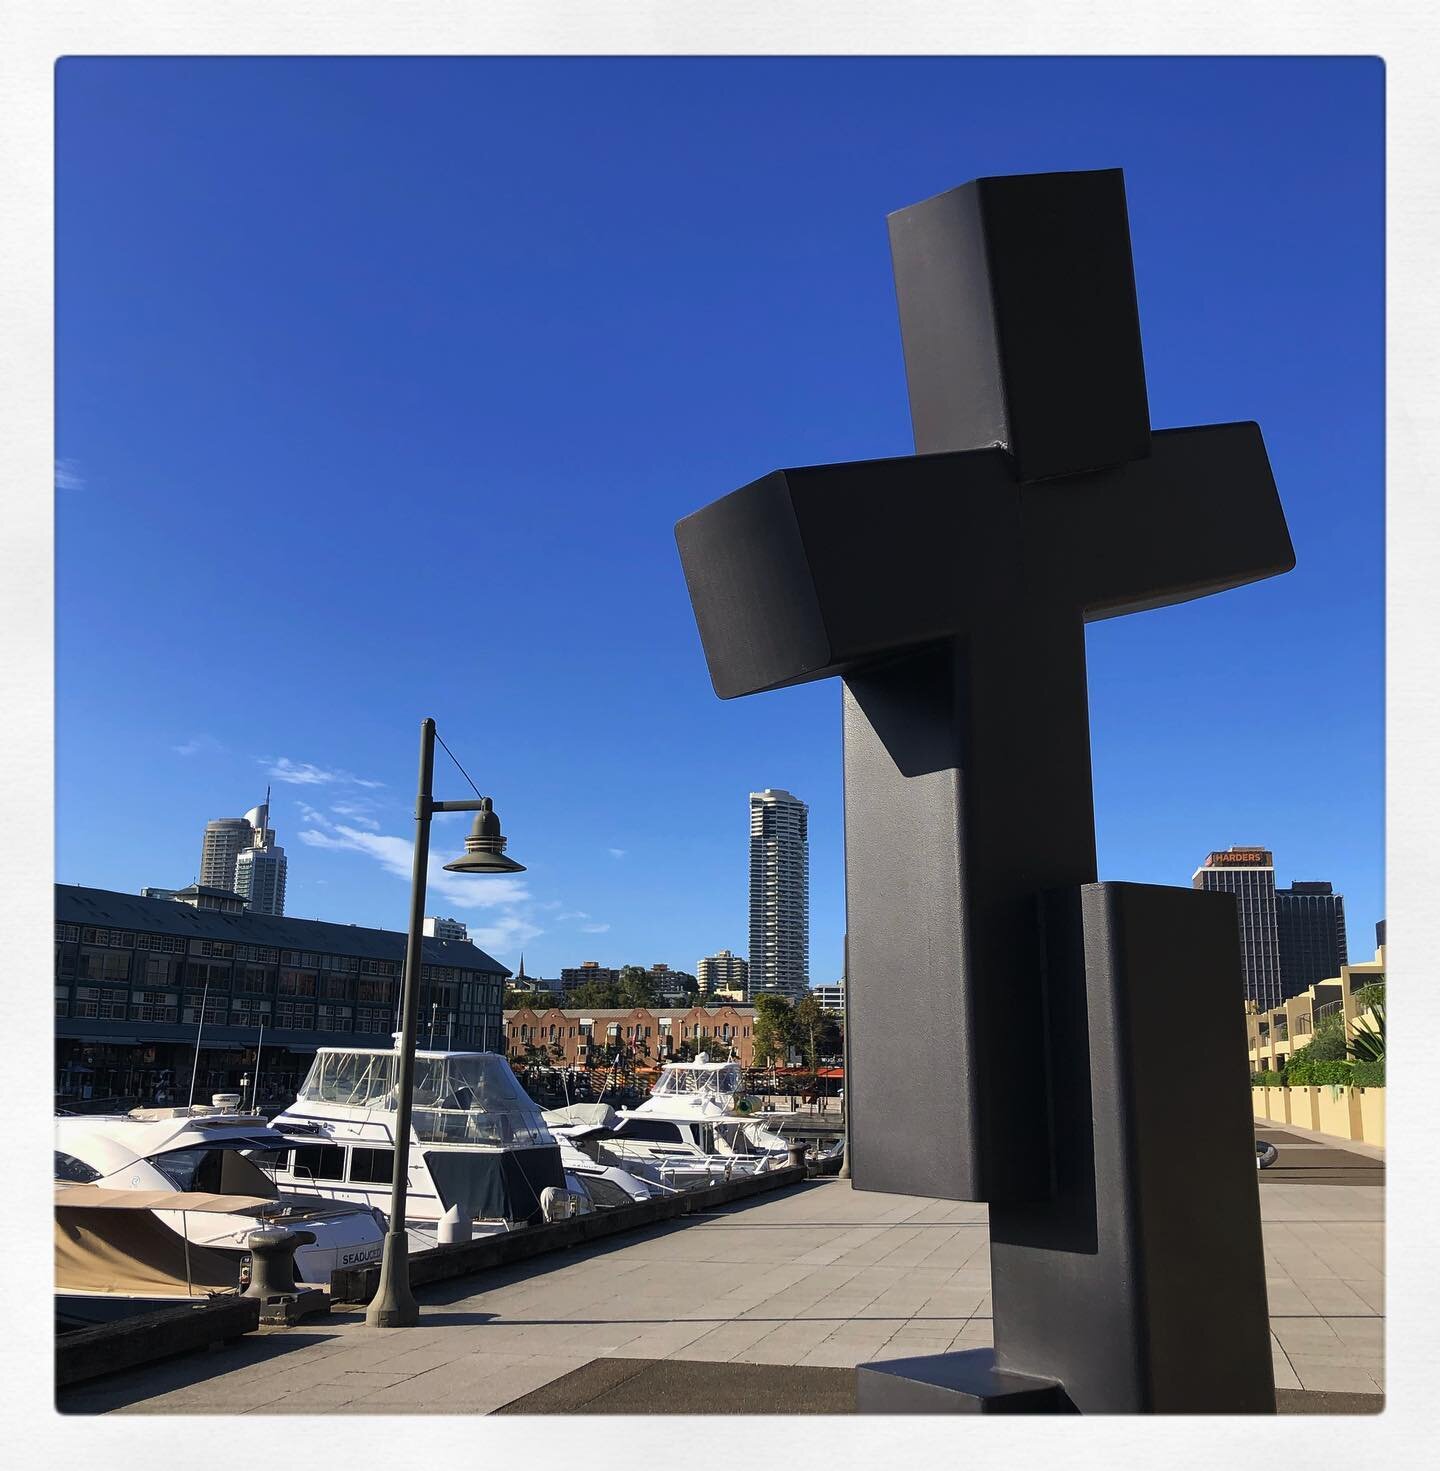 A little bit Dark Mofo or a little bit catholic guilt 🤷🏻&zwj;♀️? My morning stroll was definitely brighter (and slightly more wholesome) with Sculptures by the Wharf Woolloomooloo edition.